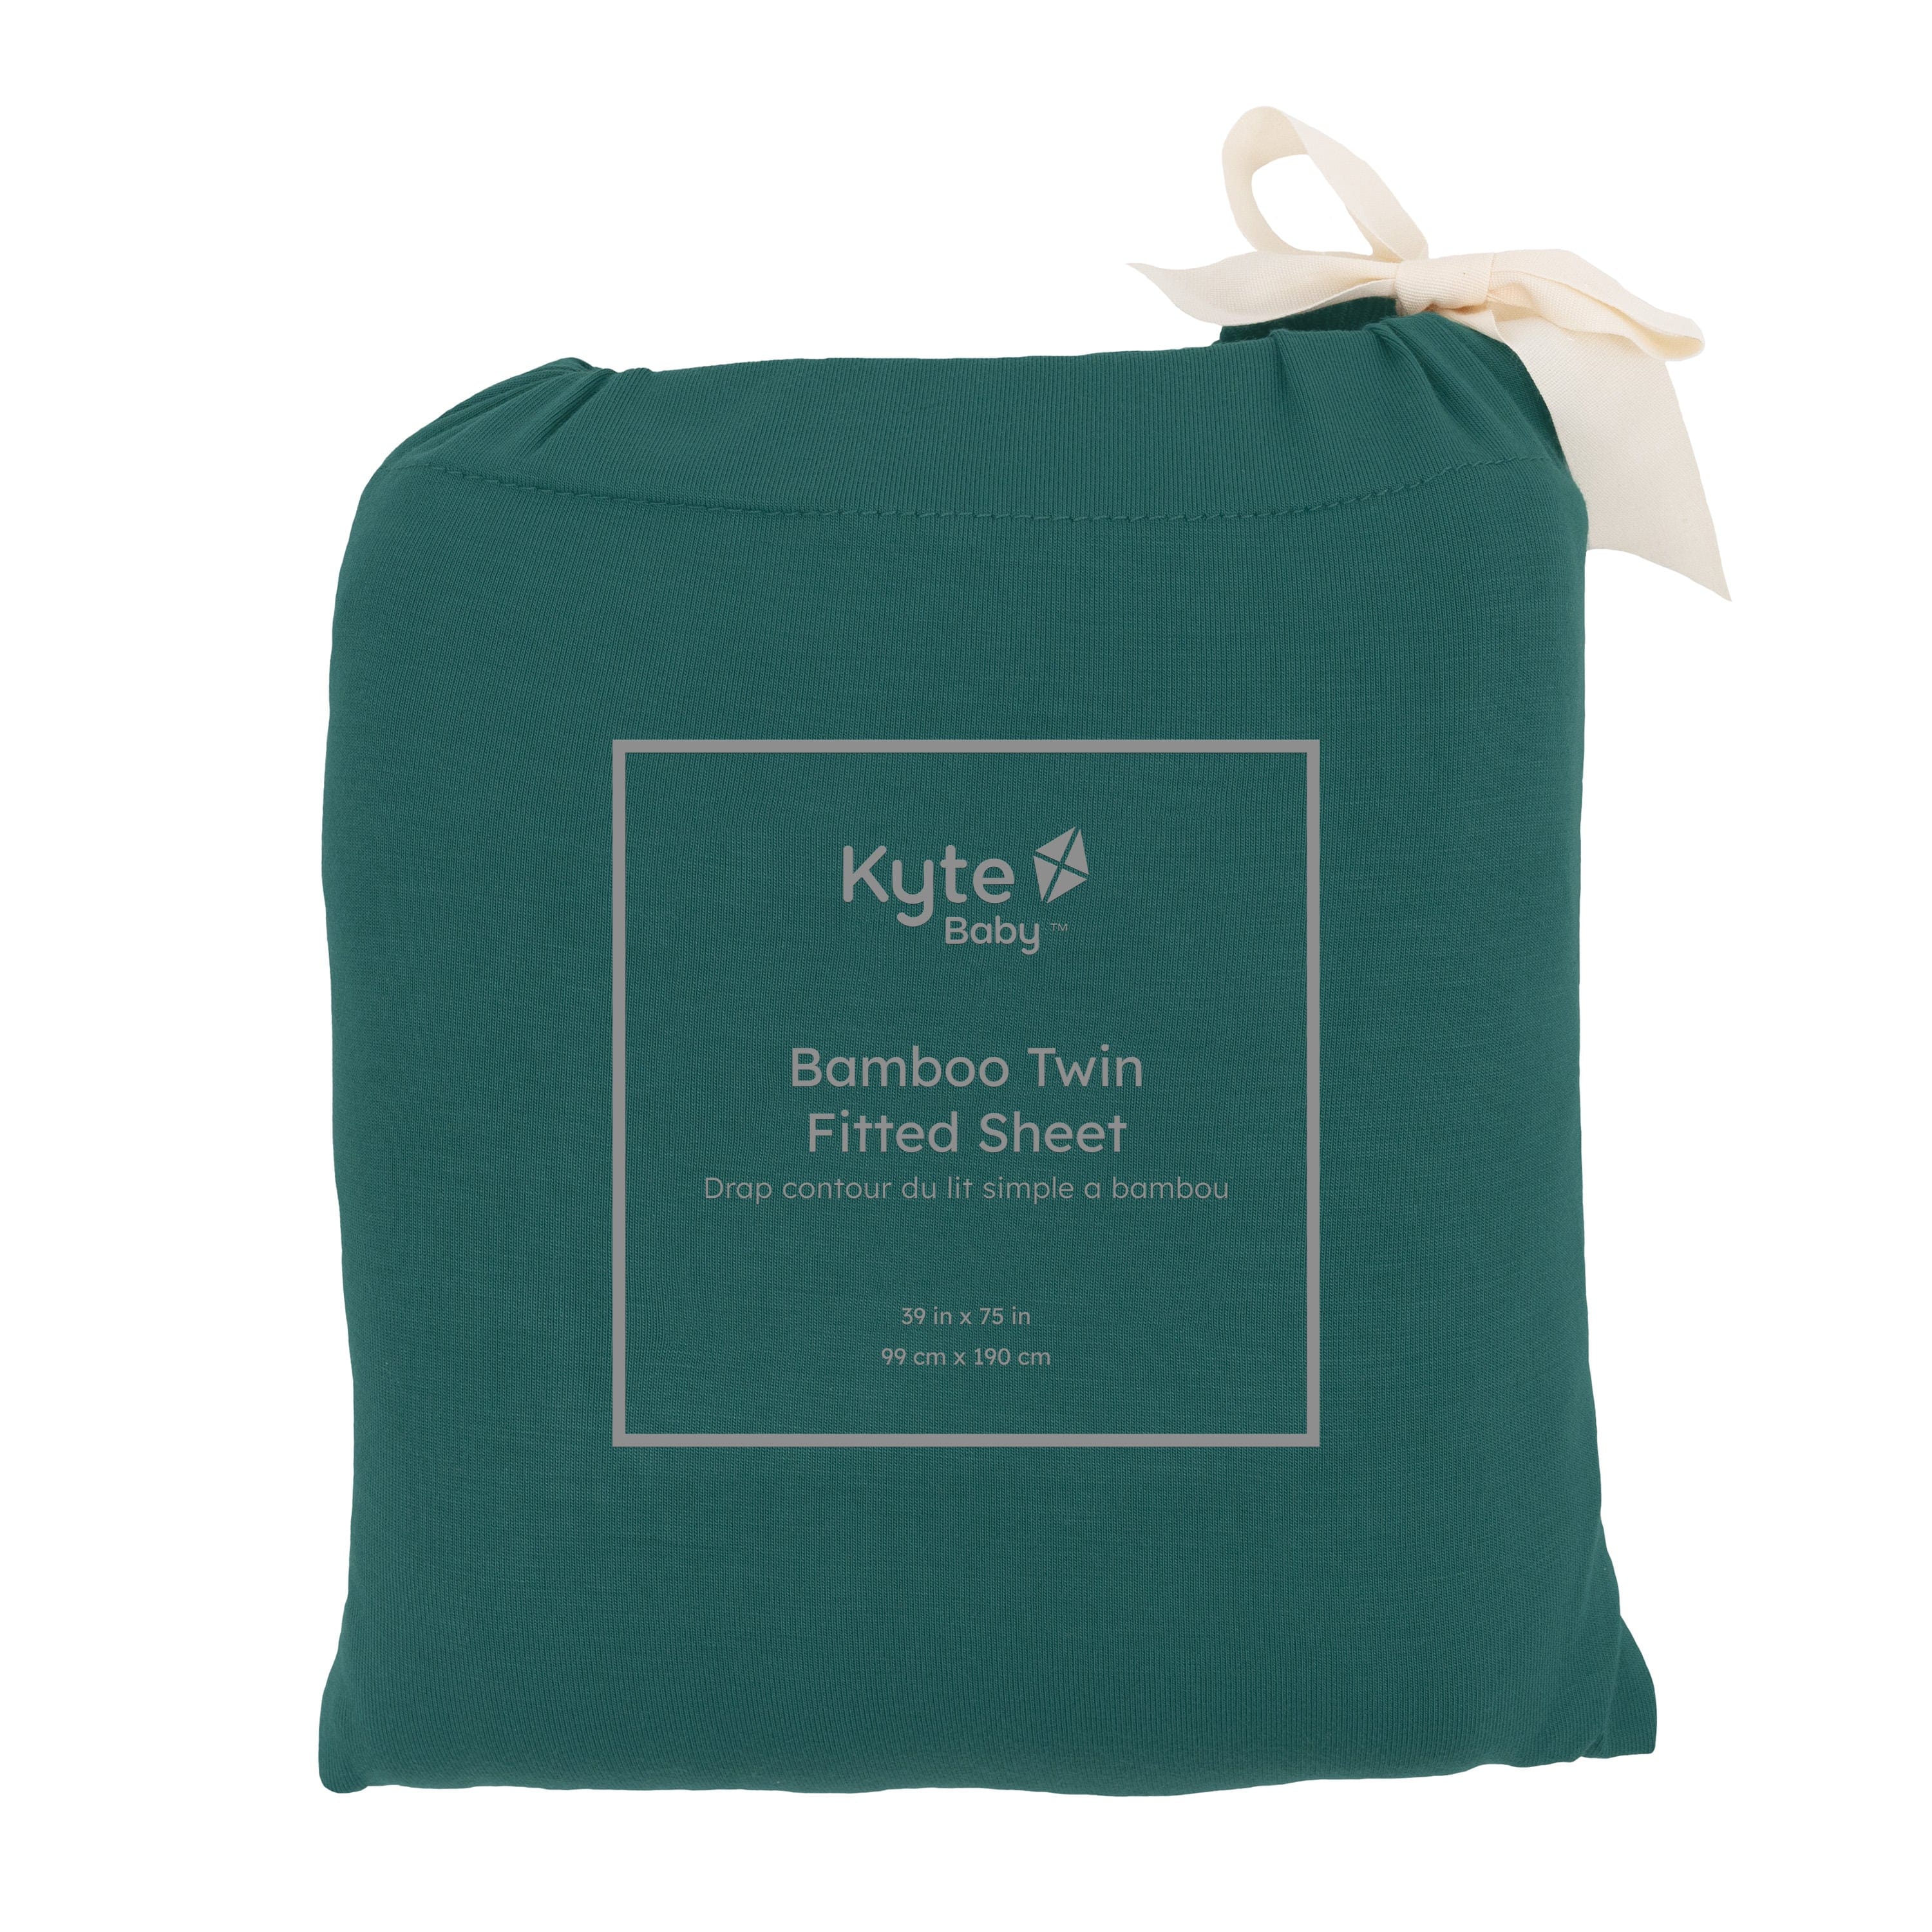 Kyte Baby Twin fitted sheet in Emerald green